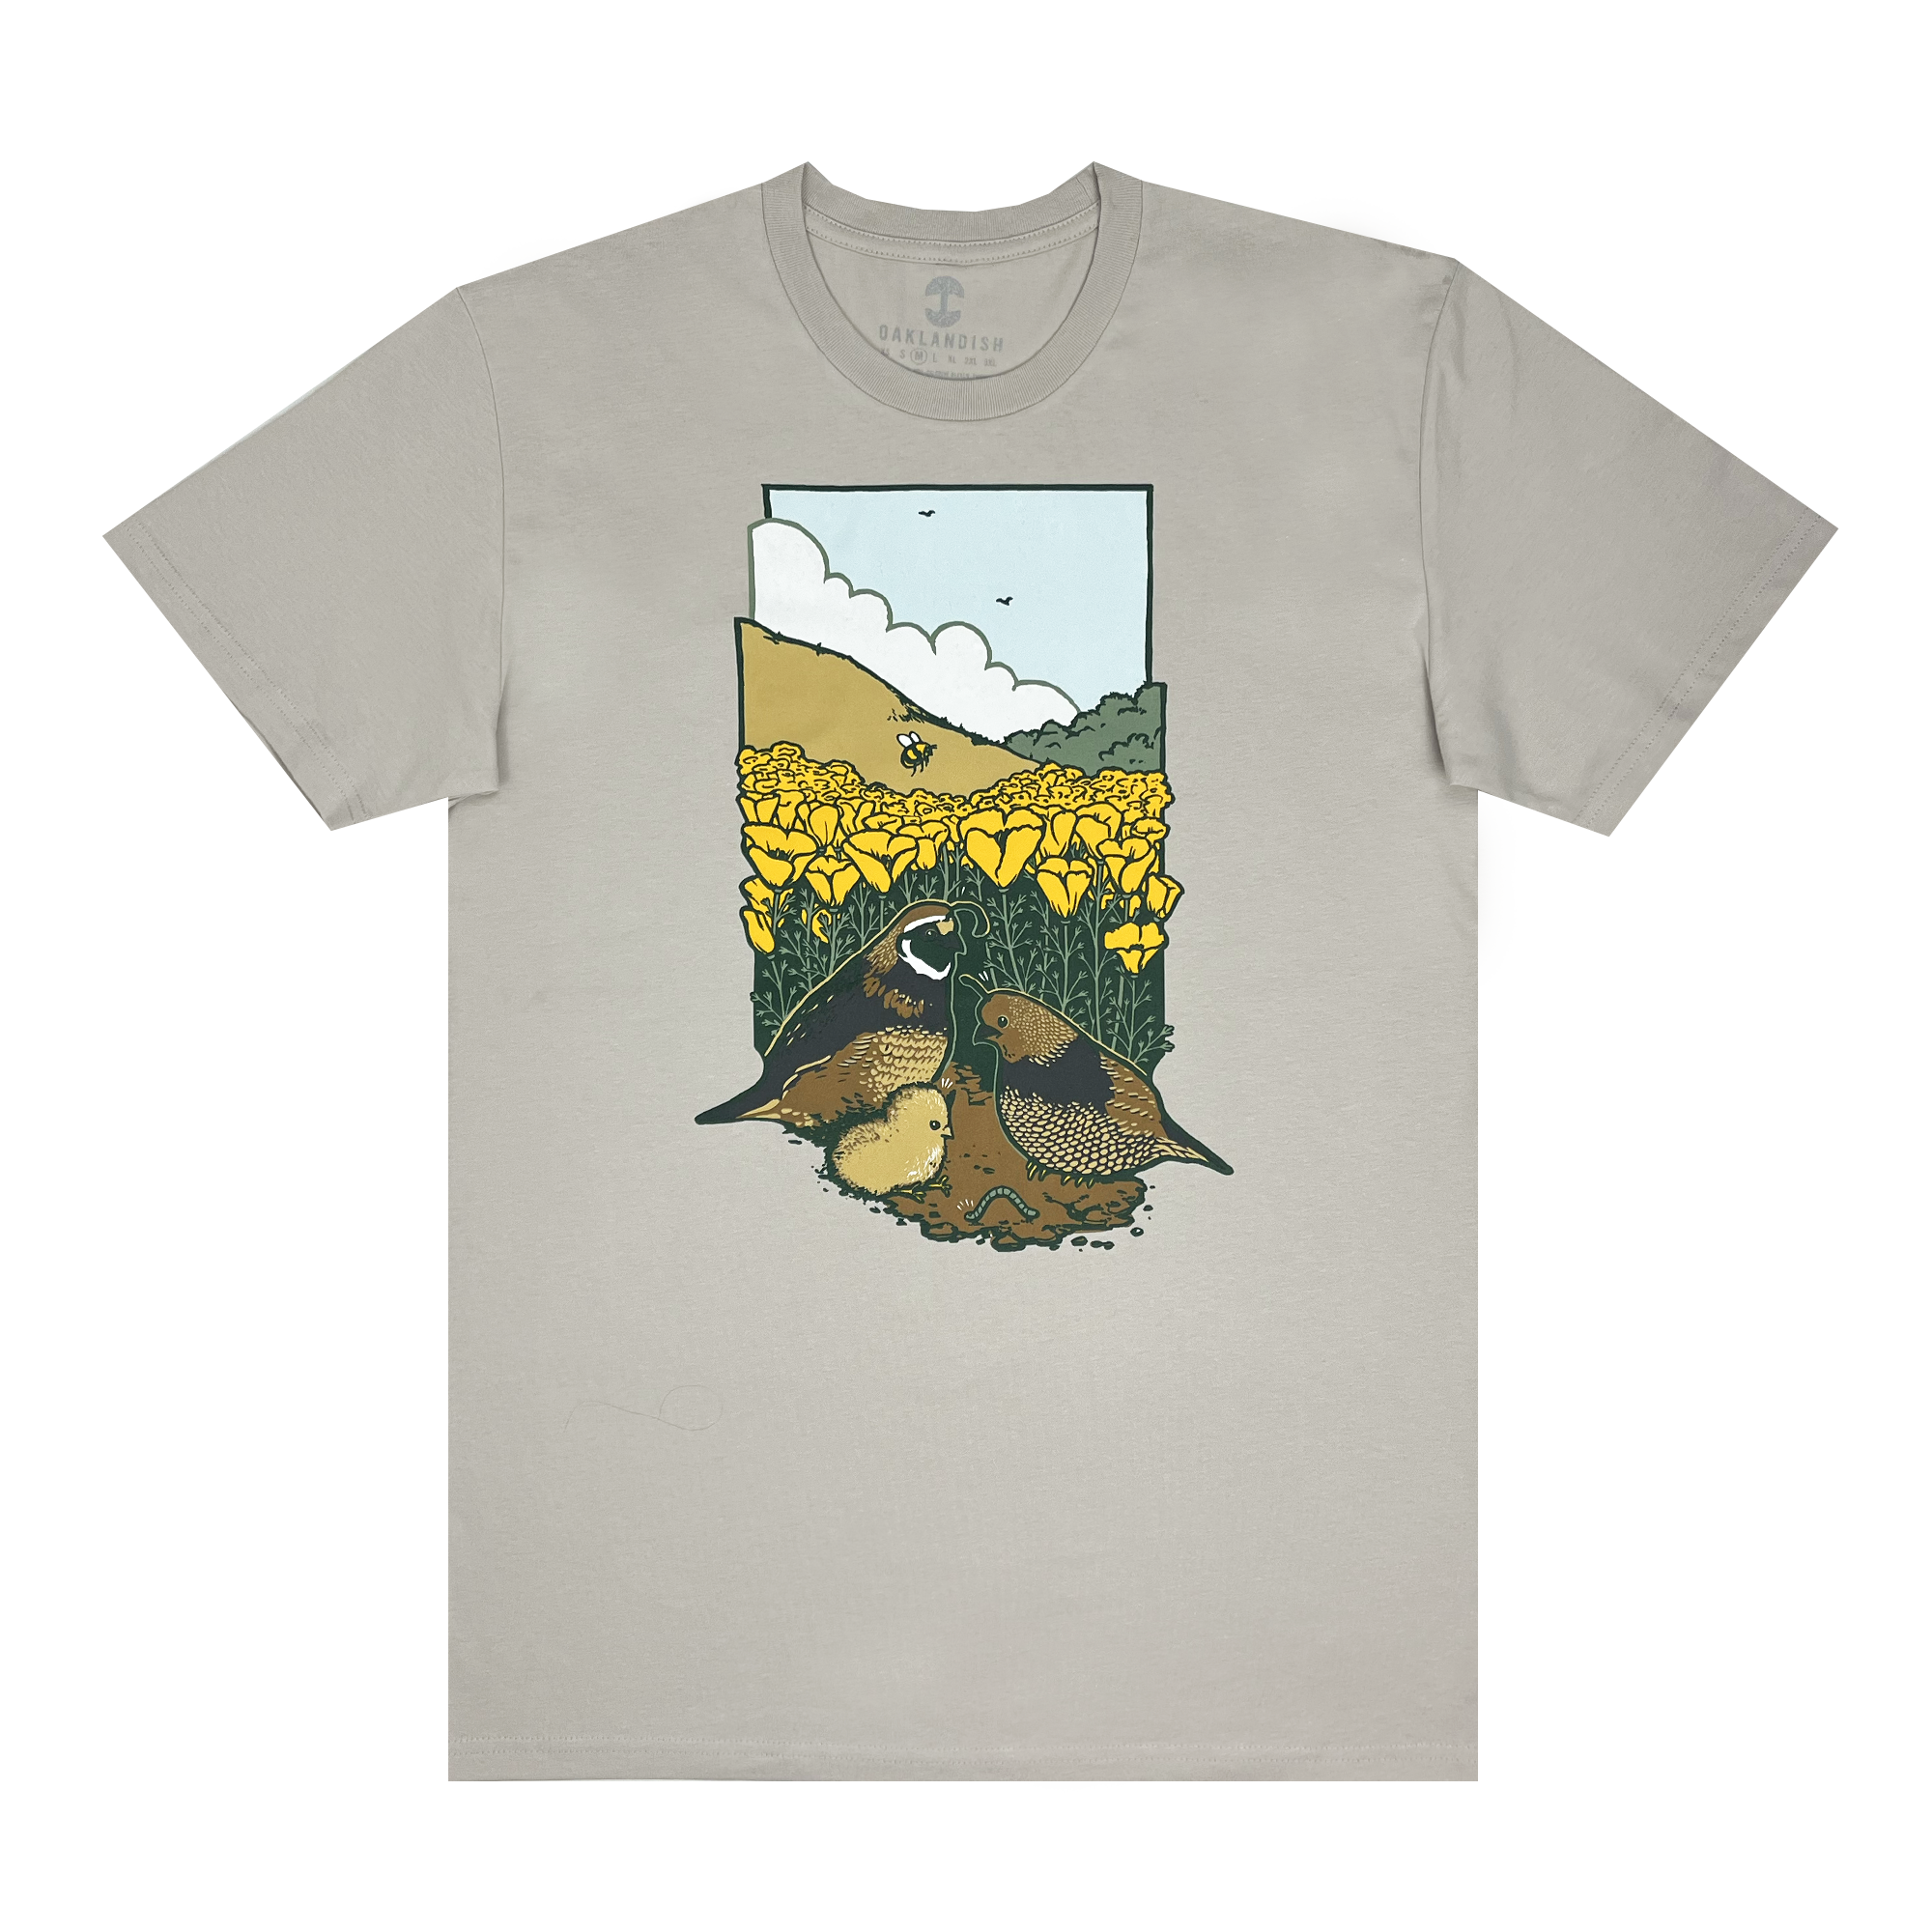 Front view of men's cotton t-shirt with quail family, bone.